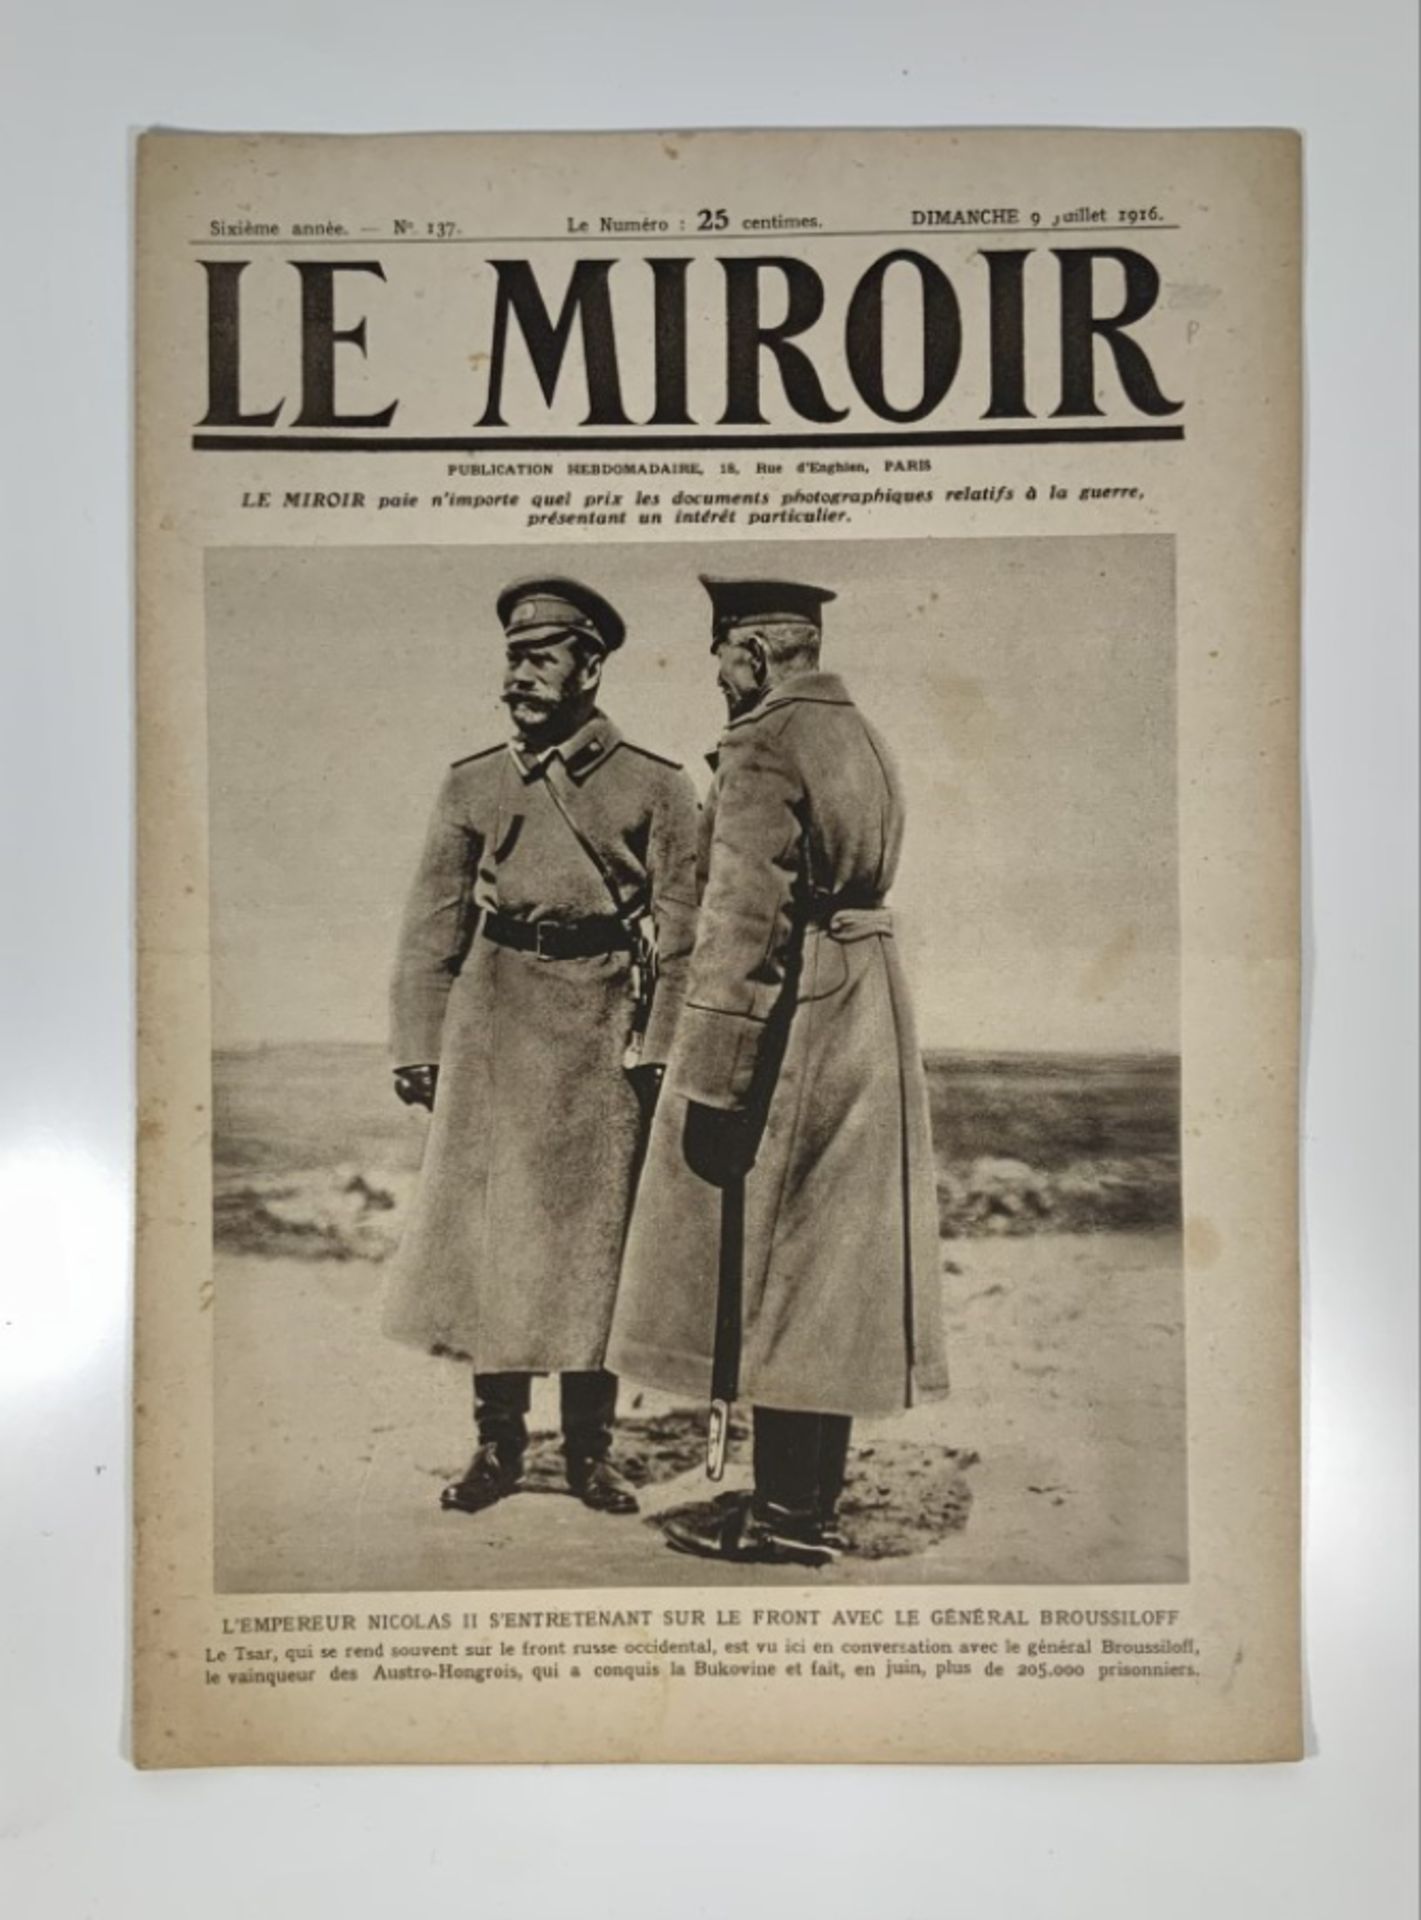 A 1916 edition of the Miroir - Image 2 of 5